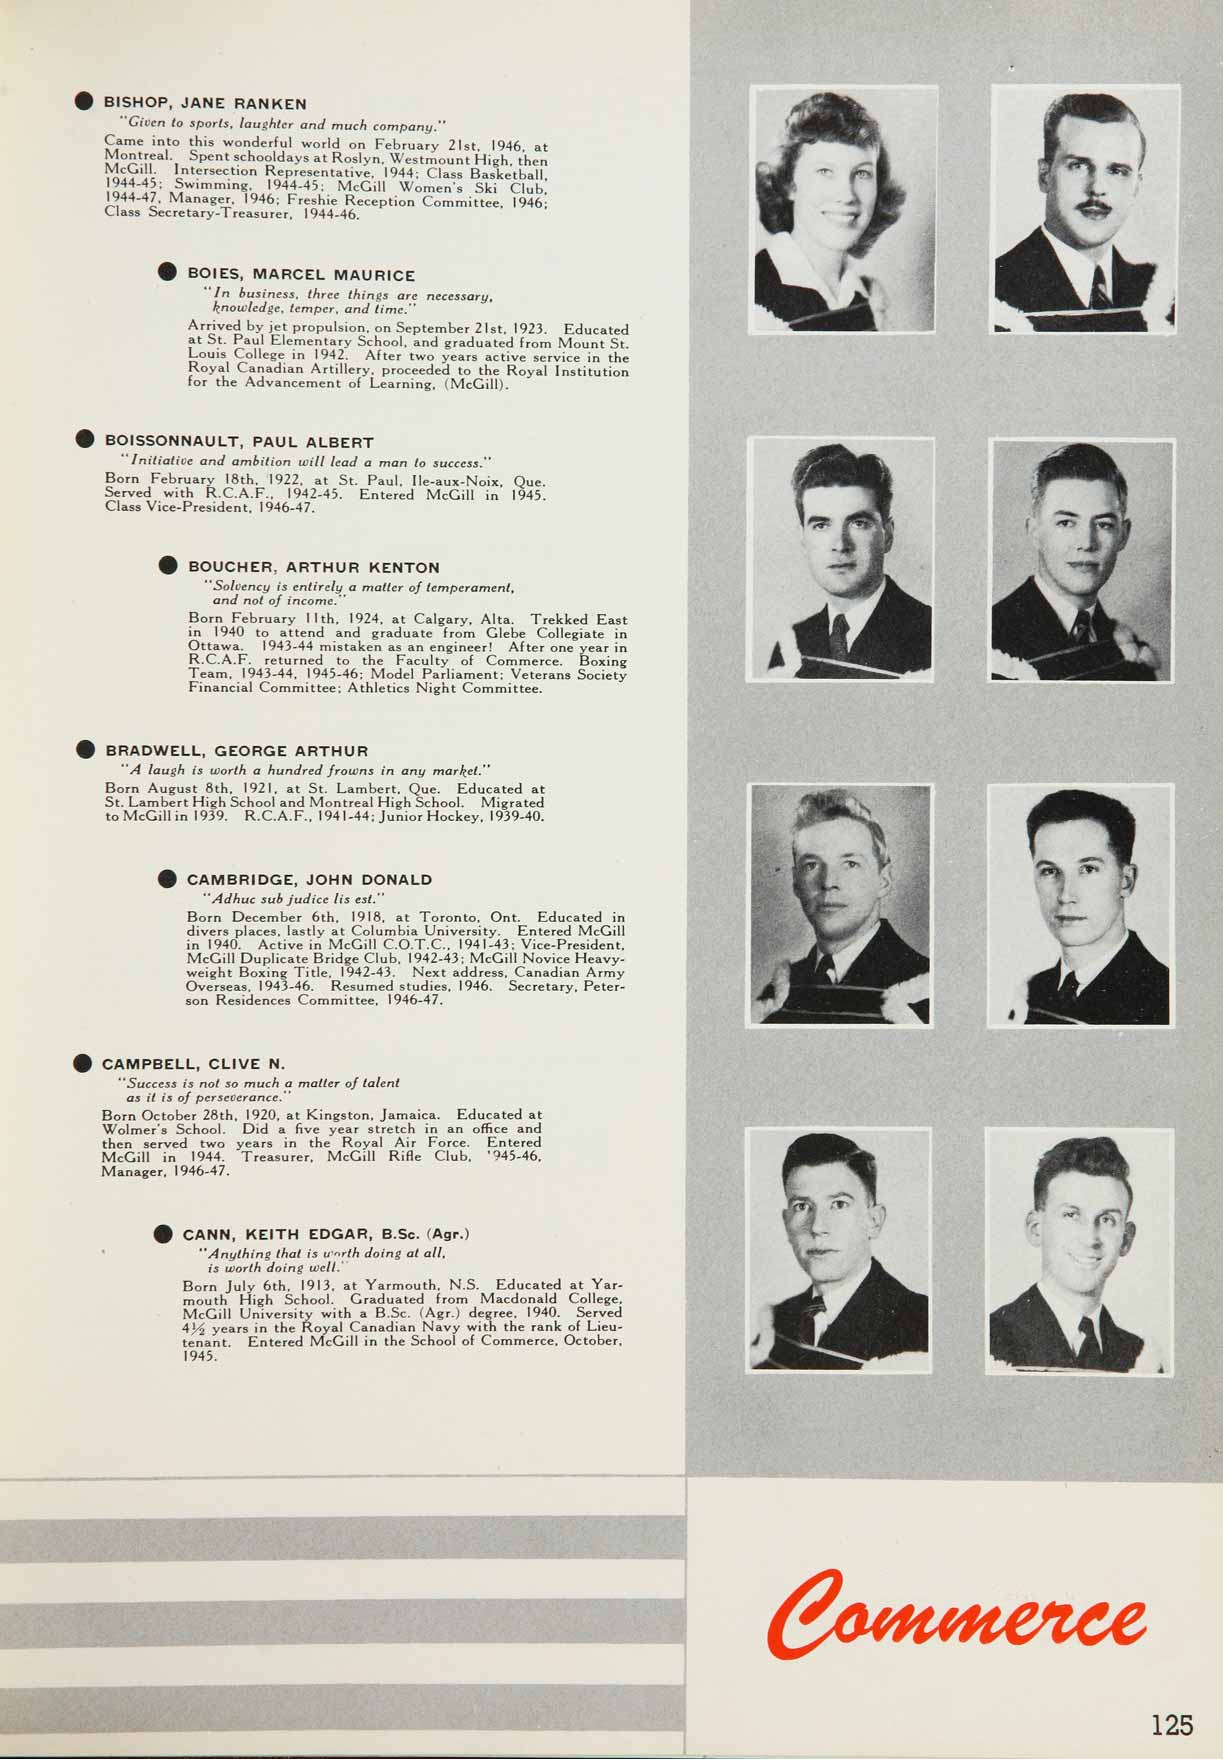 McGill Yearbook: 1947